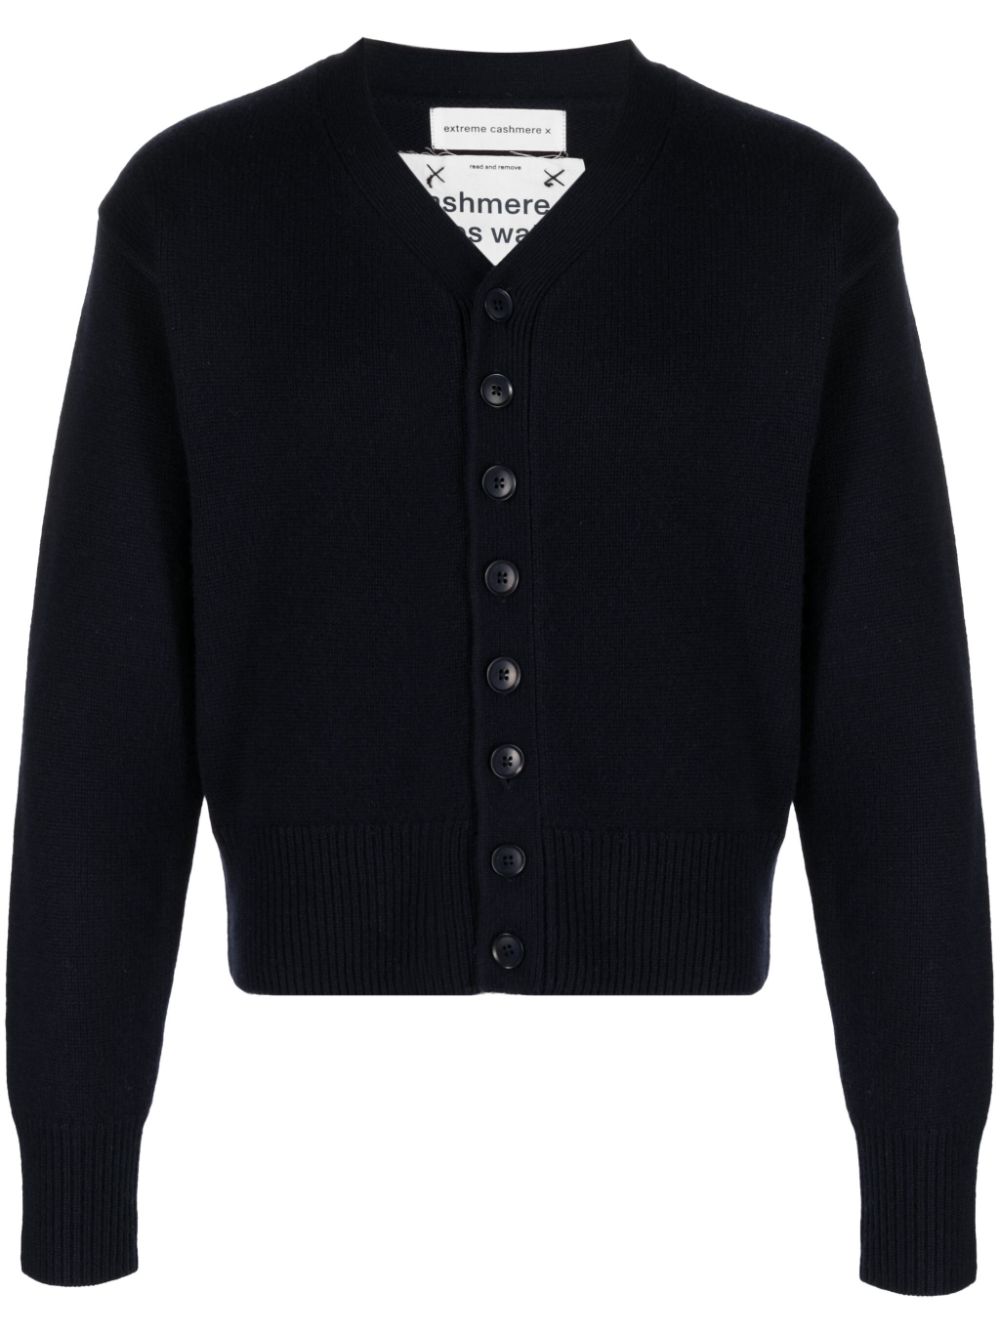 Image 1 of extreme cashmere nº309 cashmere cardigan